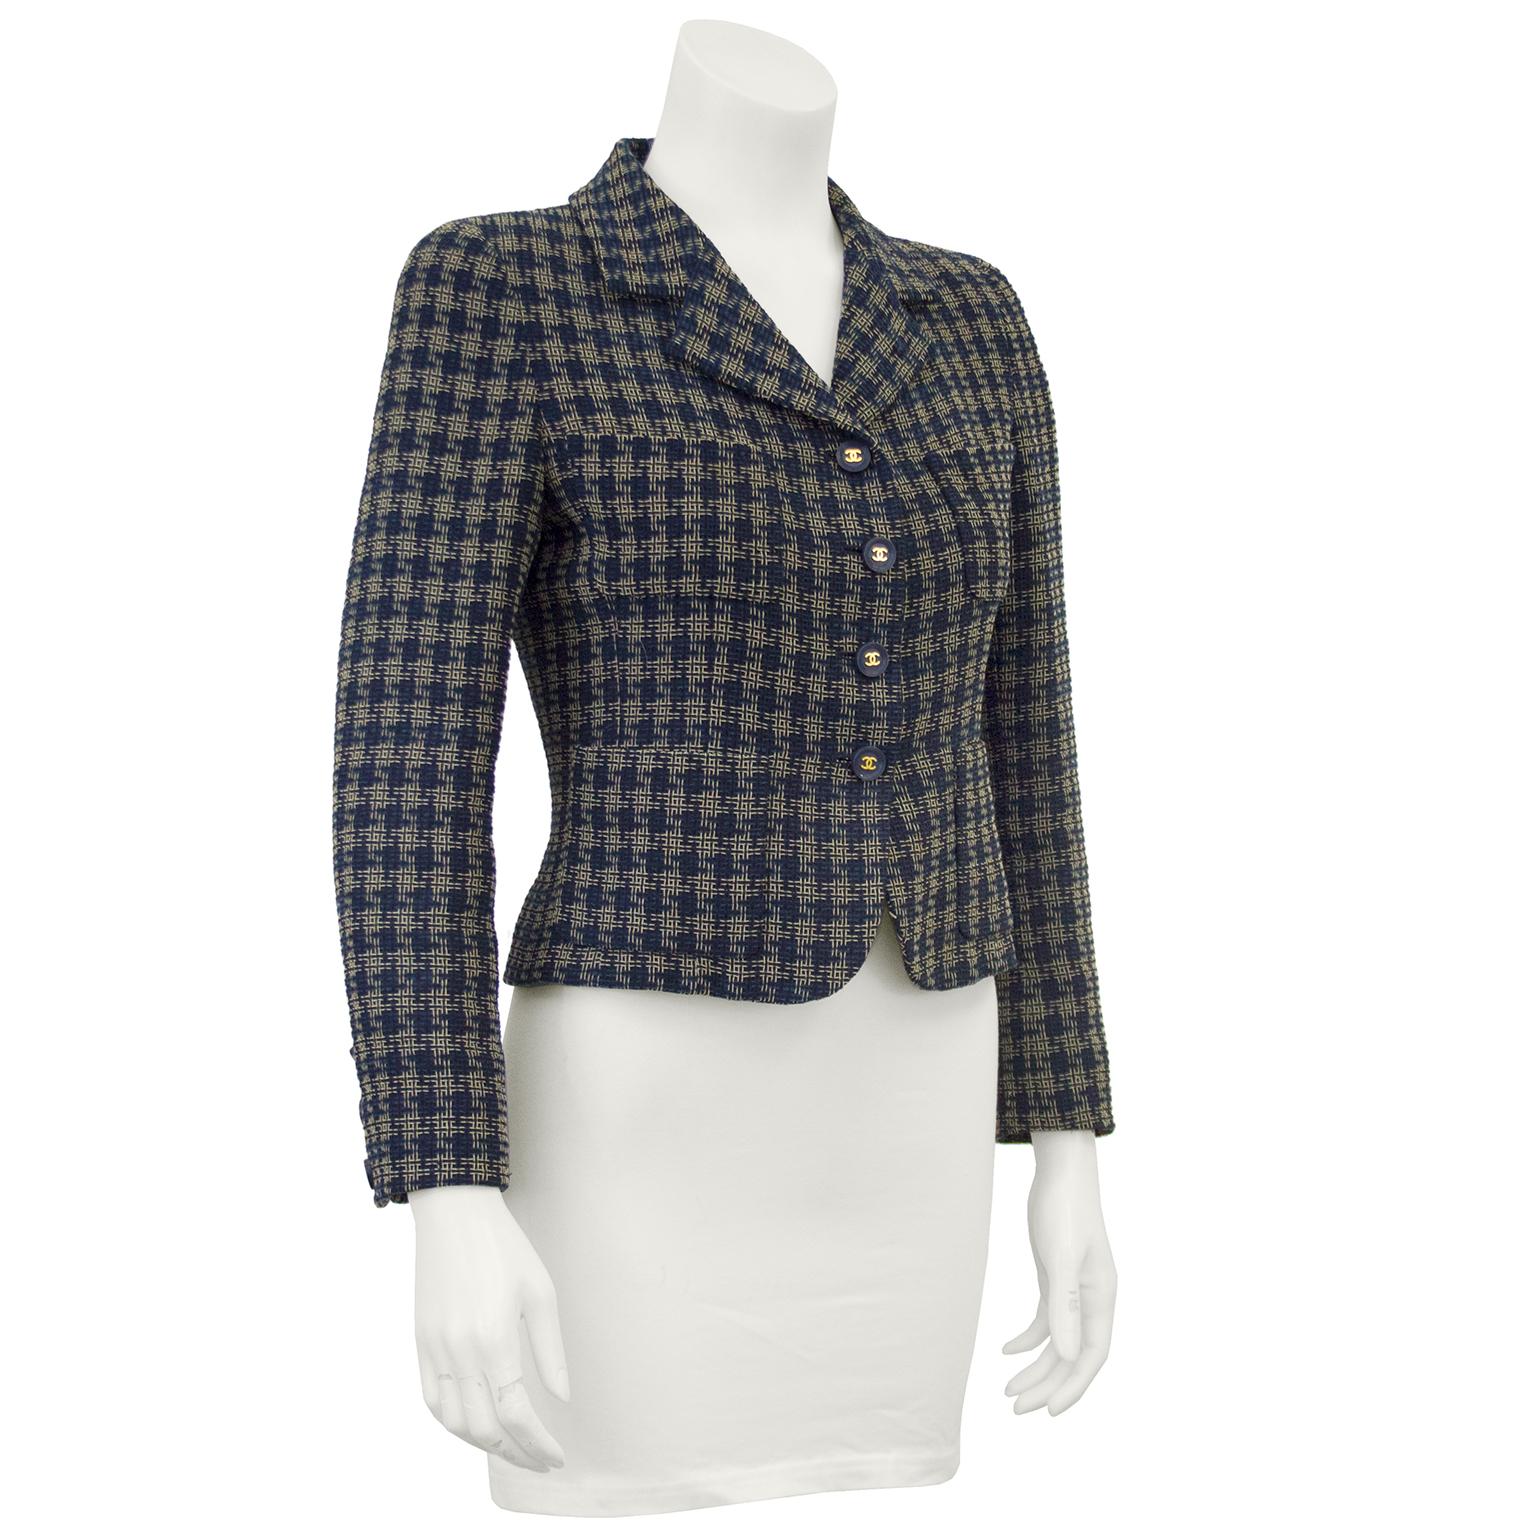 Chanel navy and cream woven plaid cropped jacket with a notched lapel, four front patch pockets and 4 buttons up the front. In excellent condition, with matching navy CC buttons on the cuffs. Fits like a US 0-2. 